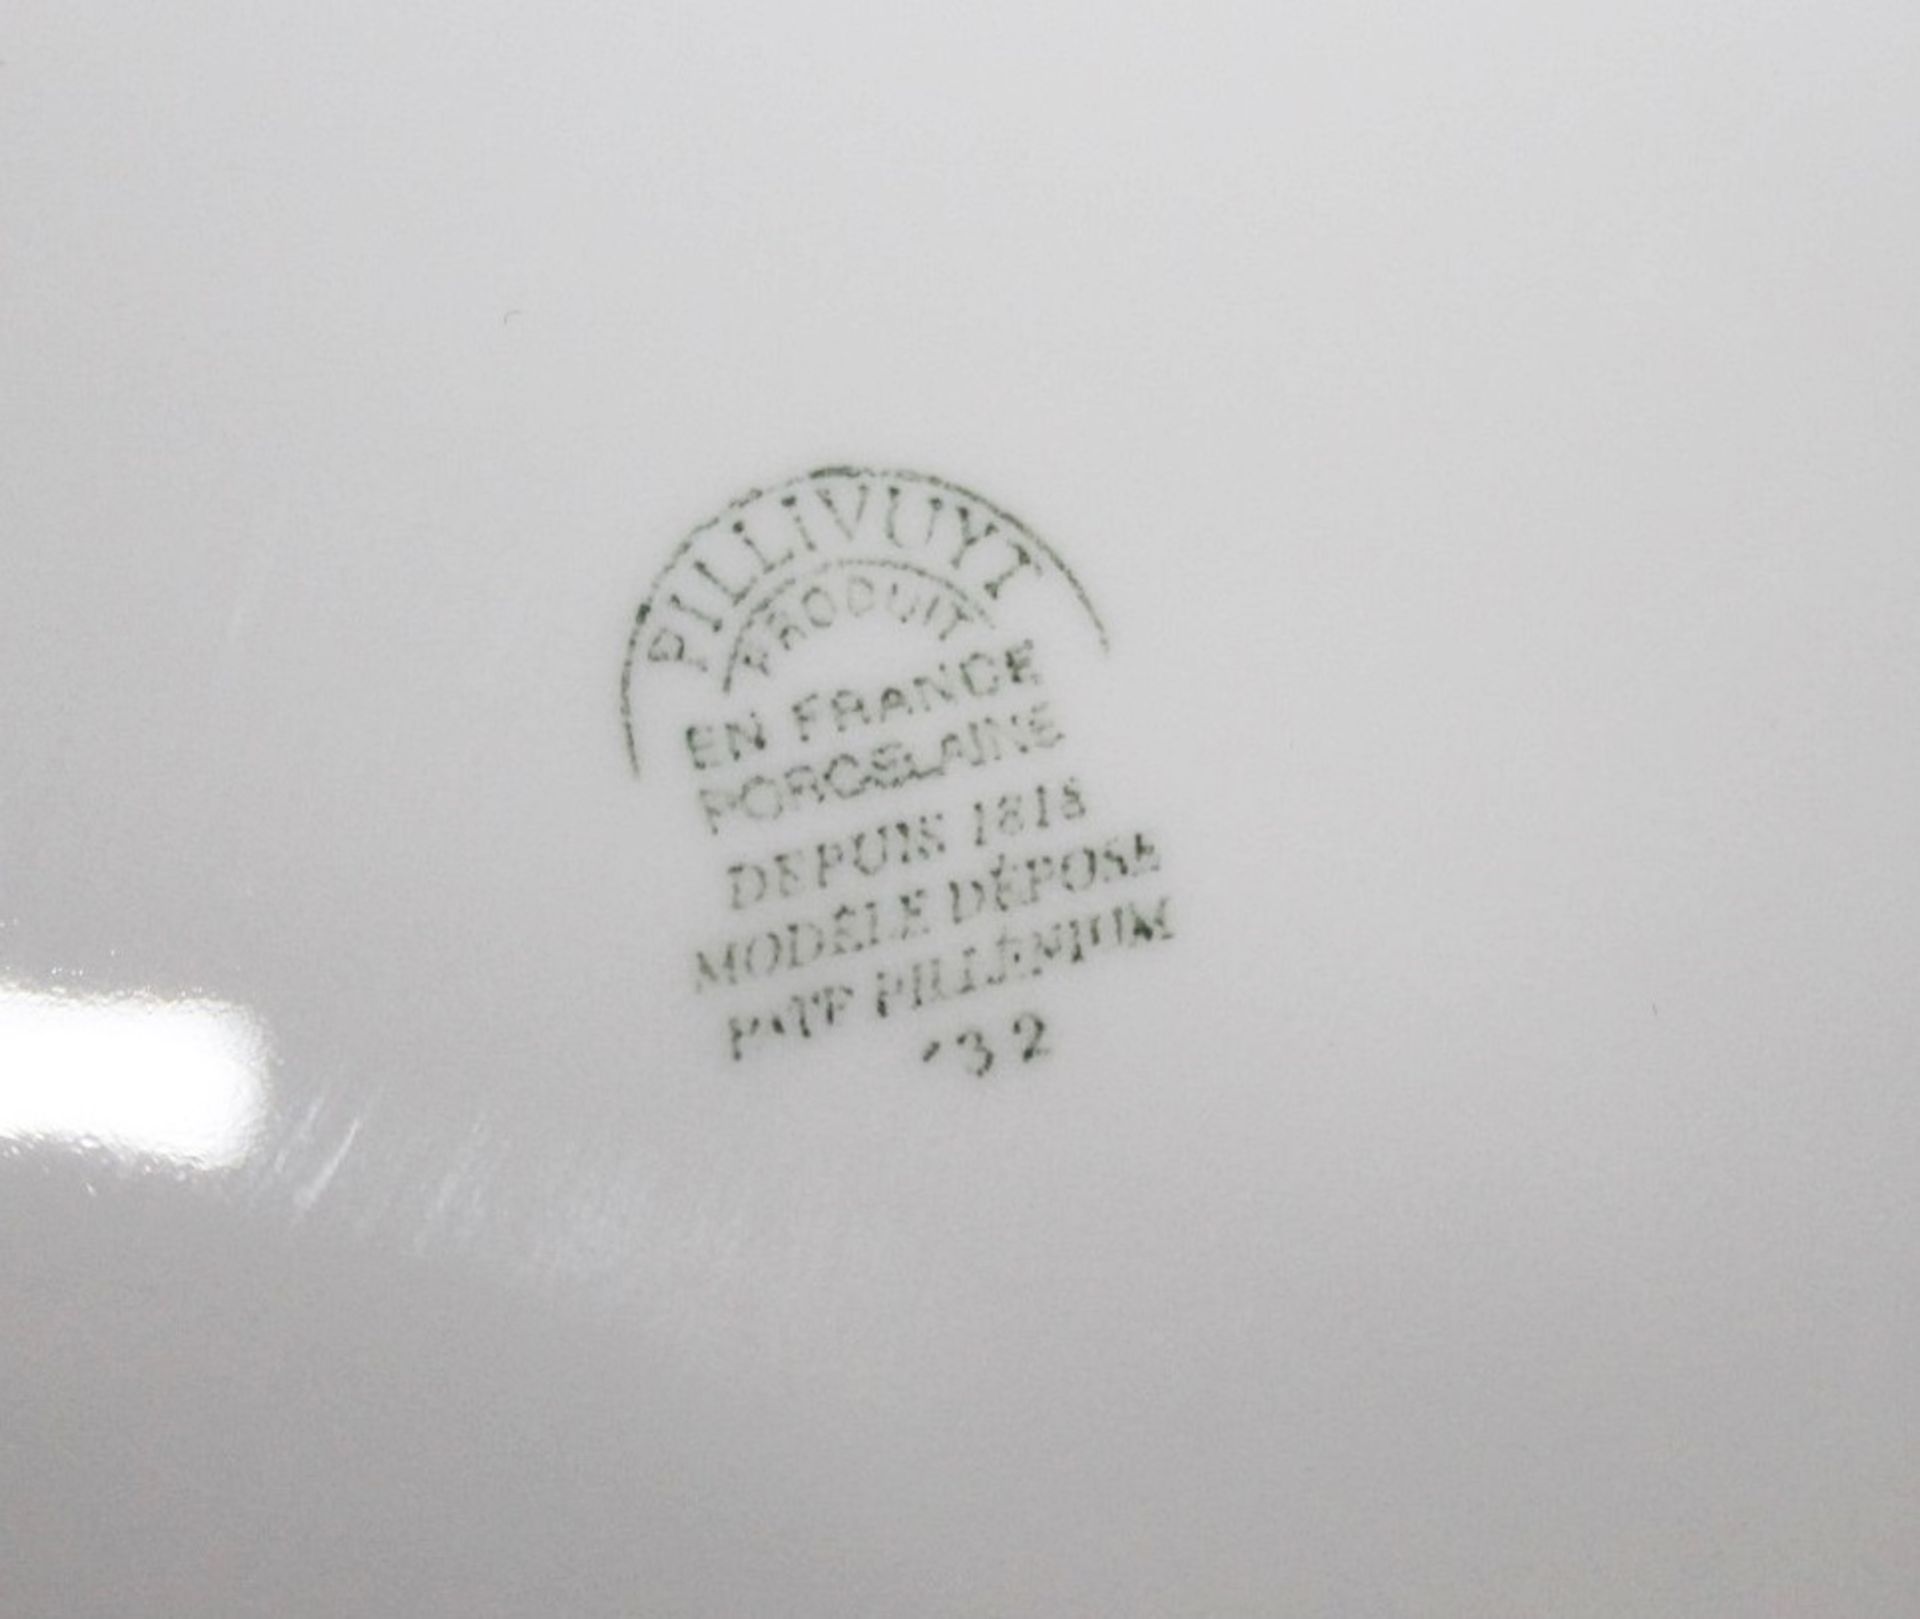 50 x PILLIVUYT Porcelain Side / Starter Plates In White Featuring 'Famous Branding' In Gold - Image 5 of 5